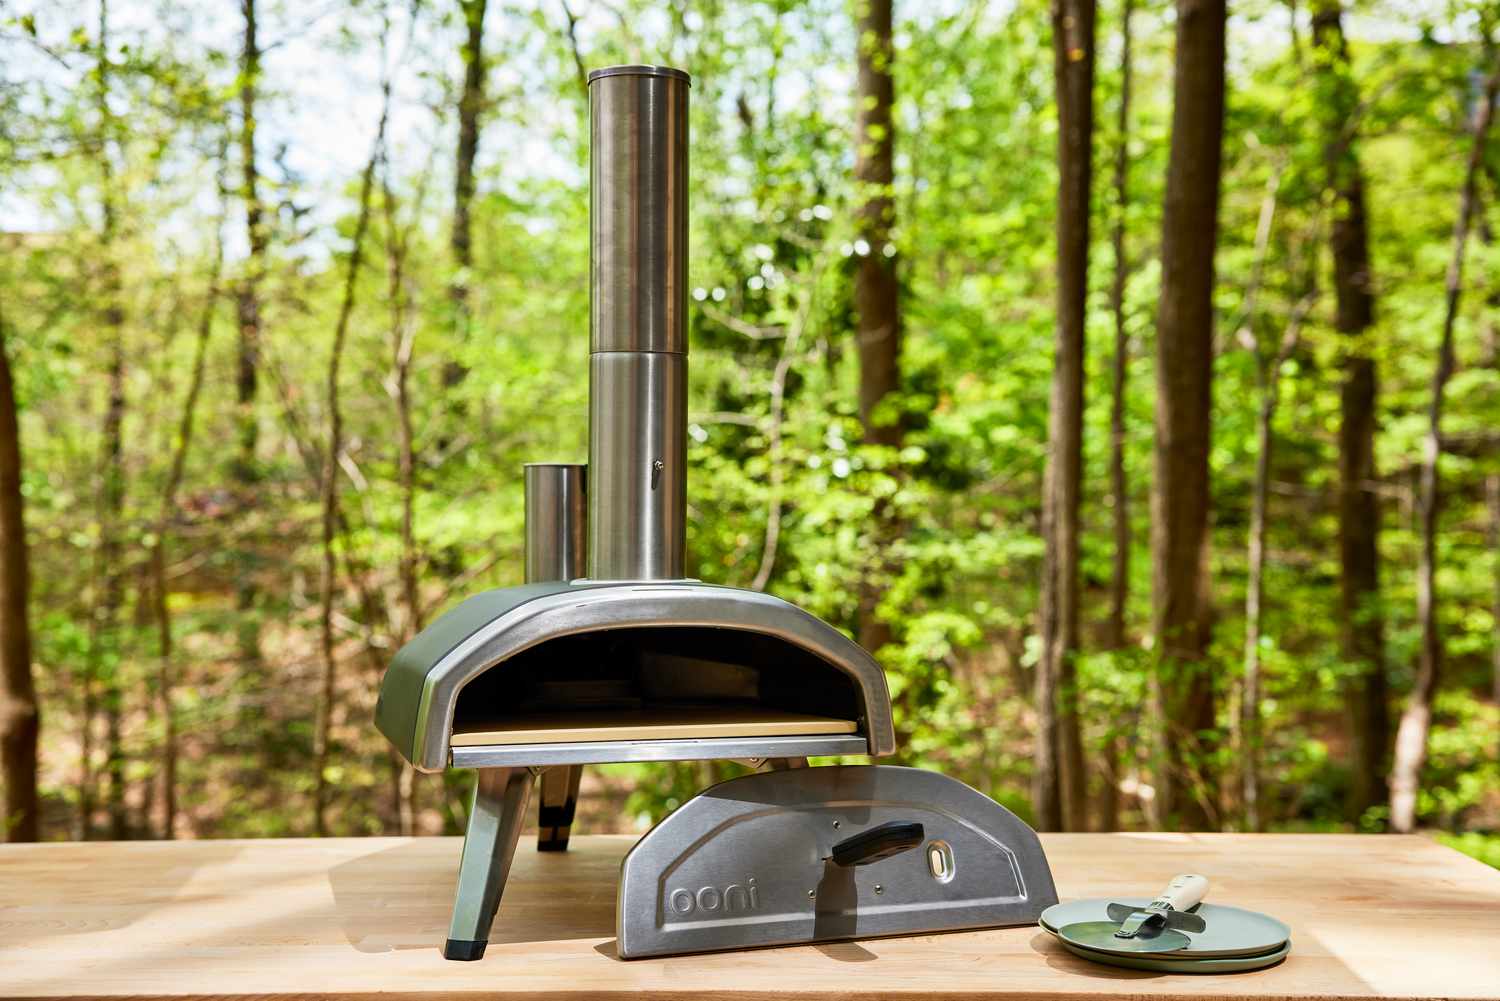 Ooni Fyra 12 Portable Wood-Fired Outdoor Pizza Oven displayed on table in front of woods